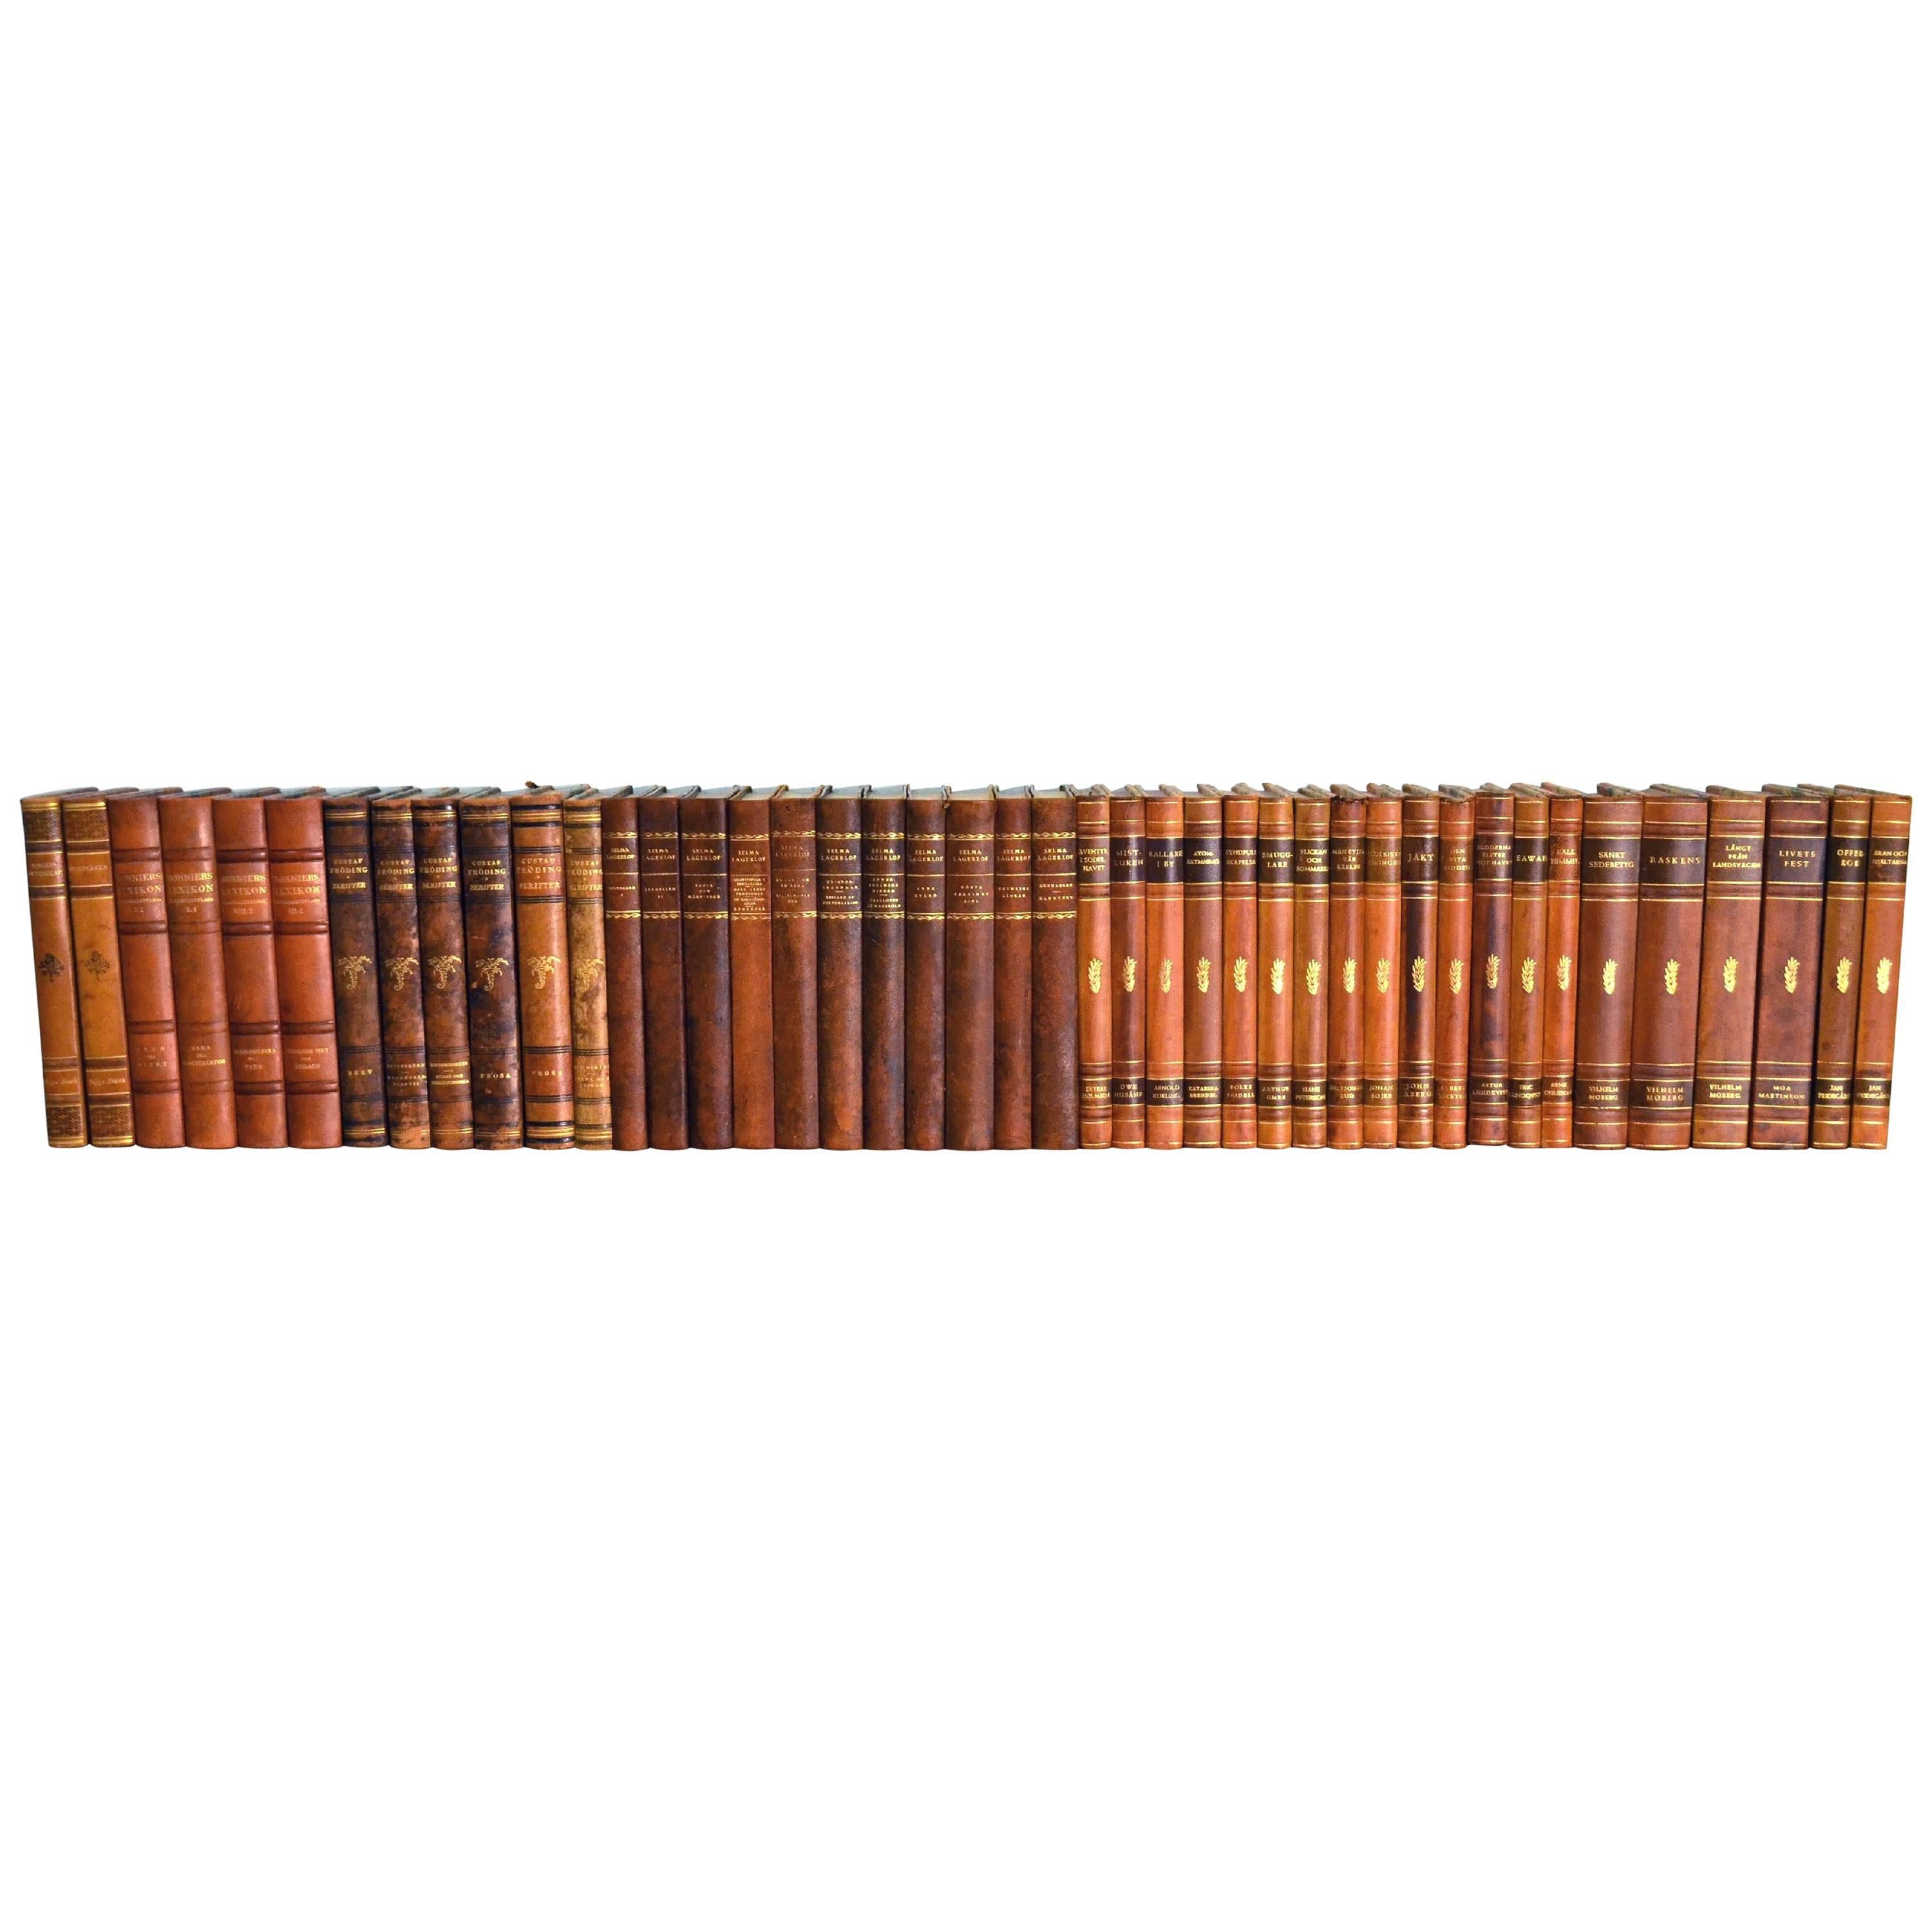 Collection of Leather Bound Books, Series 110